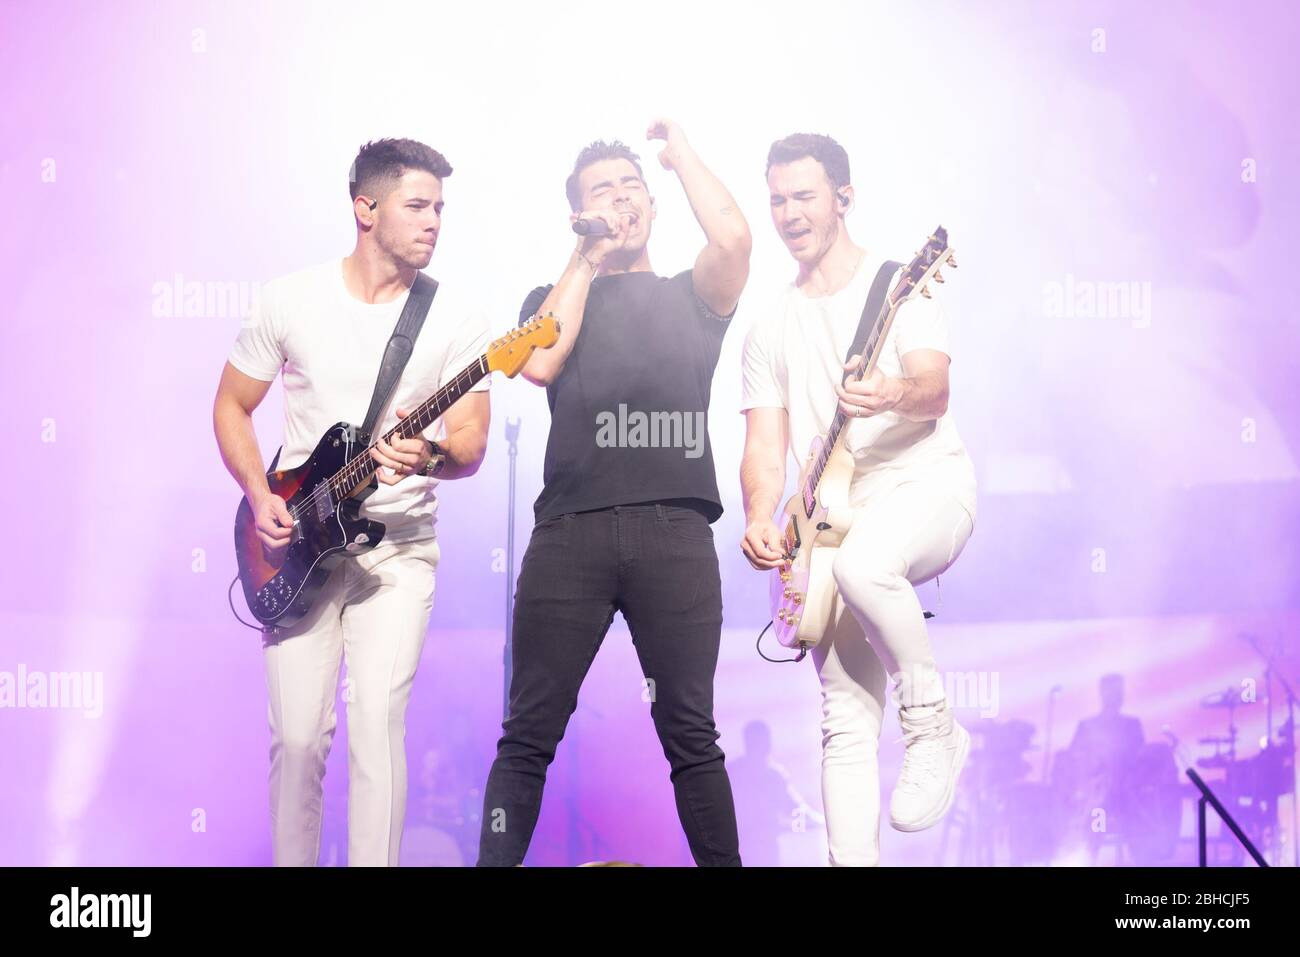 RELEASE DATE: April 24, 2020 TITLE: Happiness Continues STUDIO: Amazon DIRECTOR: Anthony Mandler PLOT: A live concert experience and exclusive look into life on the road with the Jonas Brothers during their sold out 'Happiness Begins' concert tour in 2019. STARRING: KEVIN JONAS, JOE JONAS, NICK JONAS. (Credit Image: © Amazon/Entertainment Pictures) Stock Photo